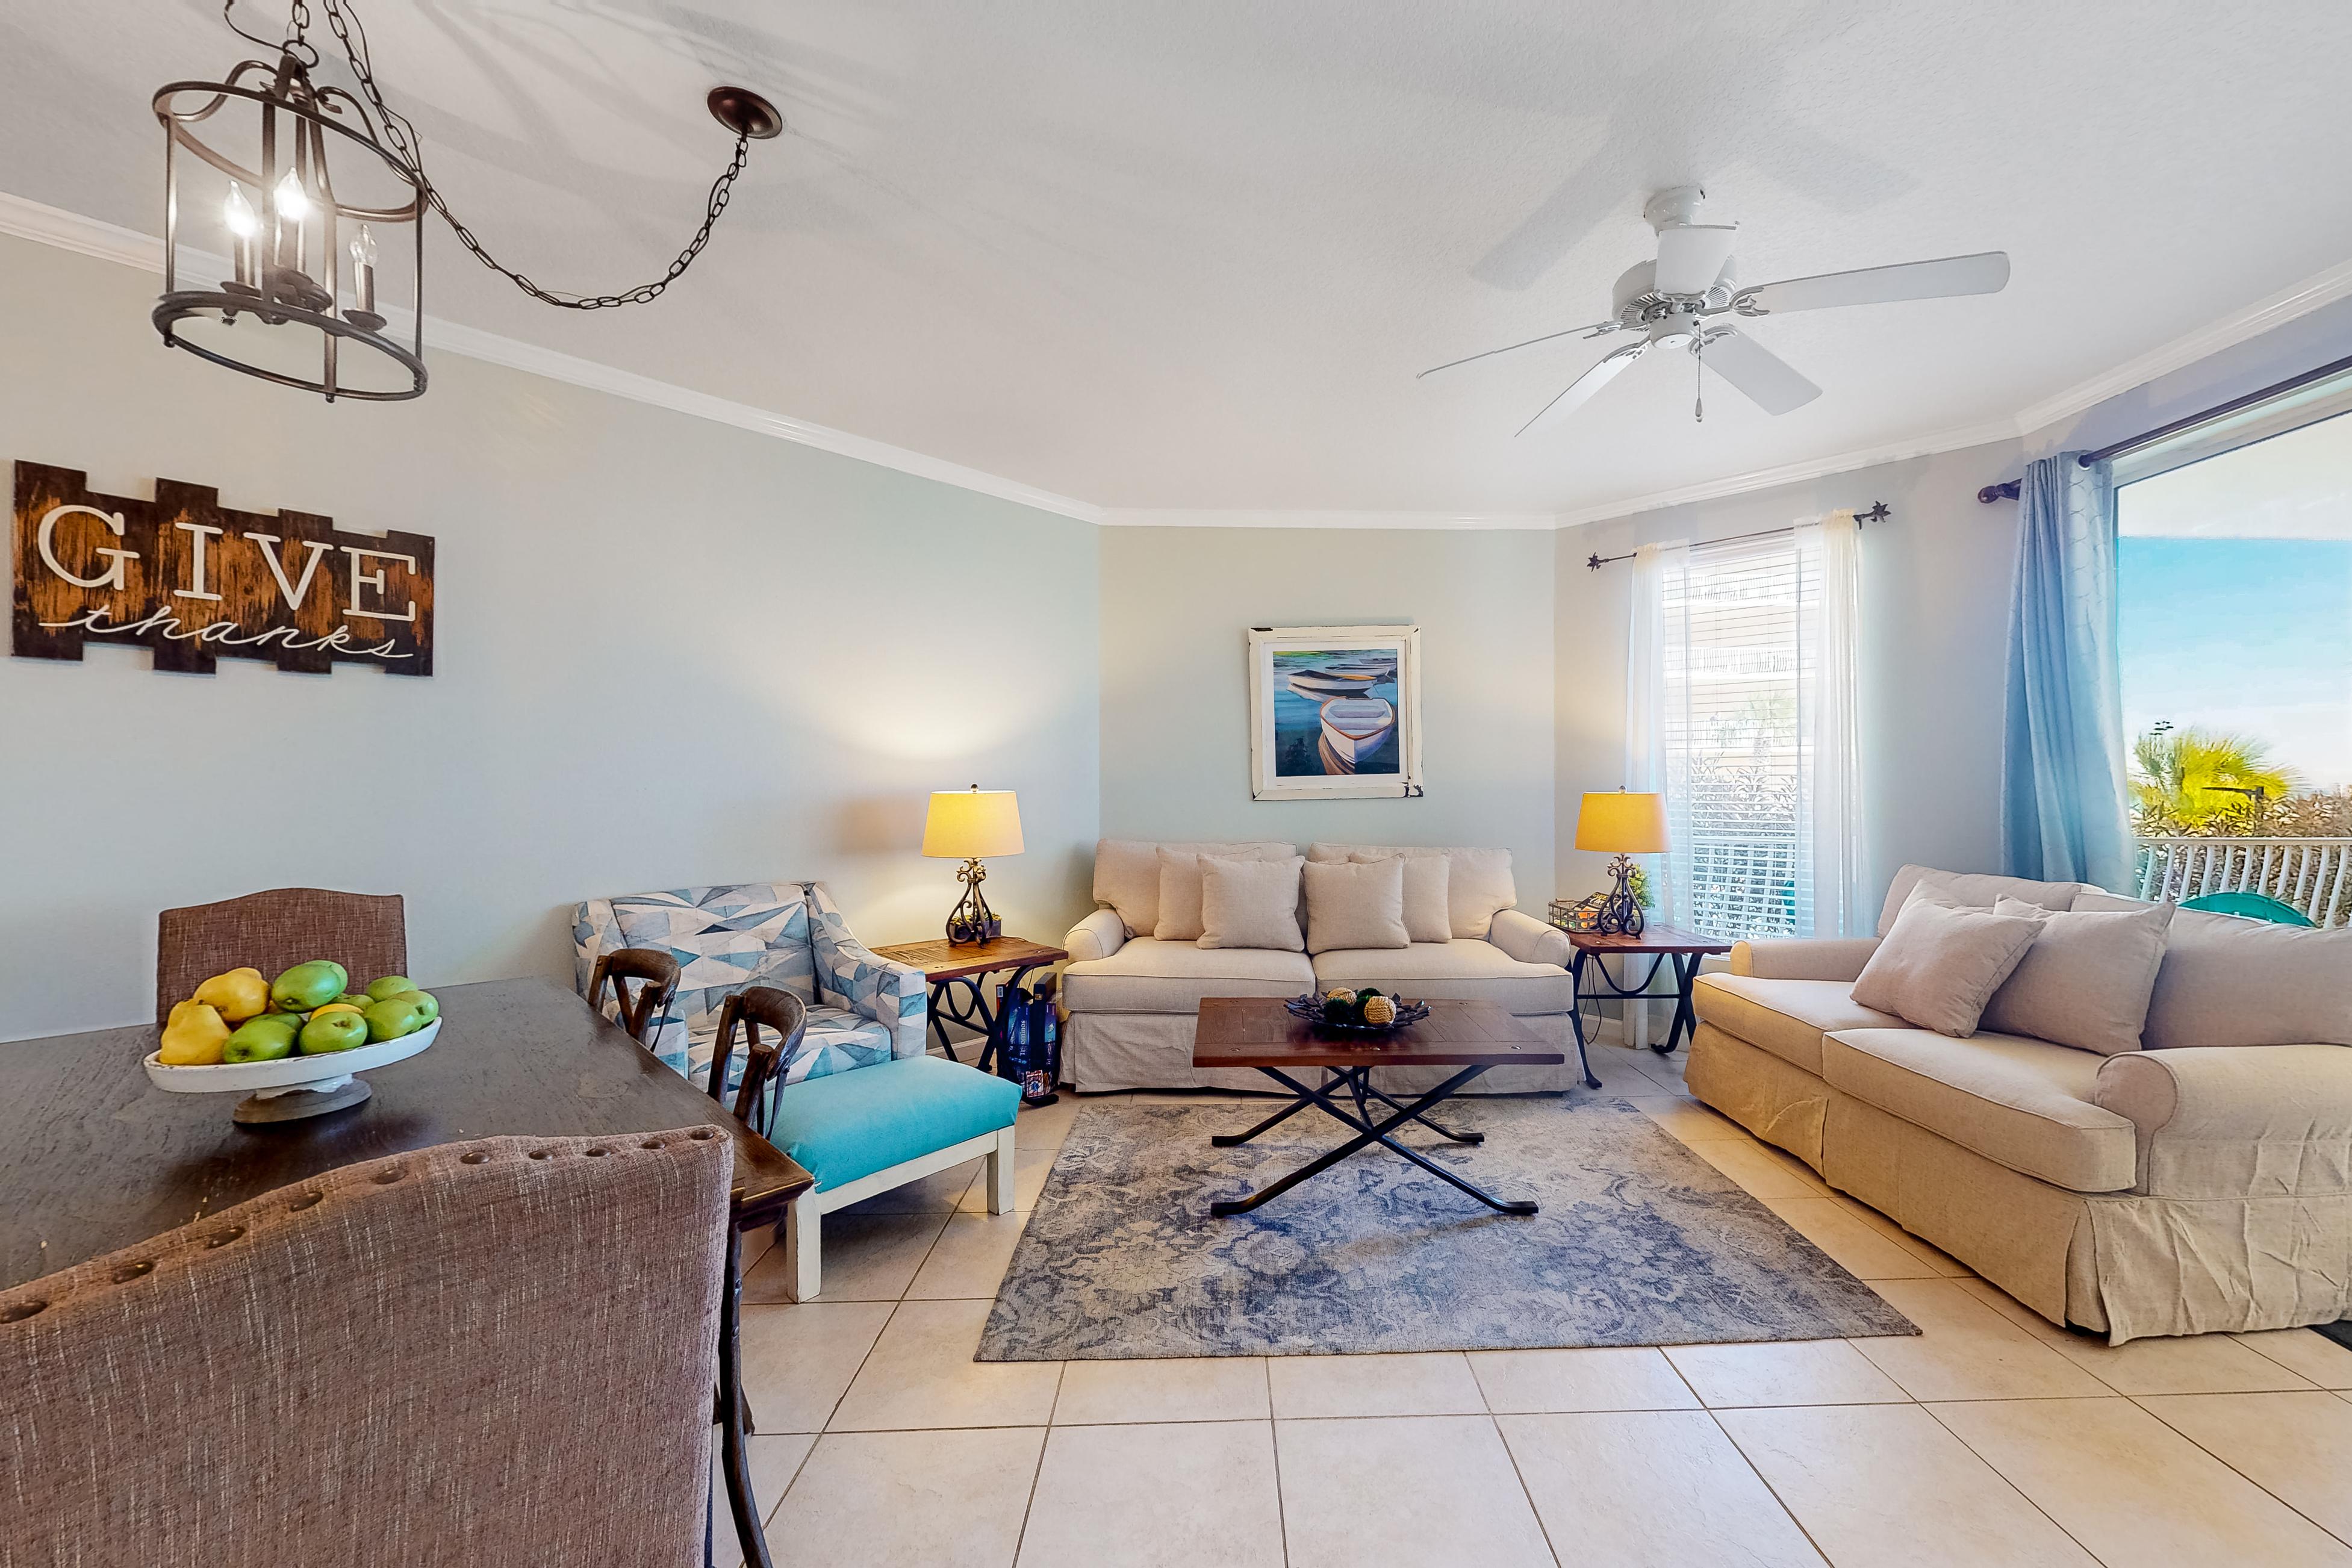 Property Image 1 - Dunes of Seagrove B103